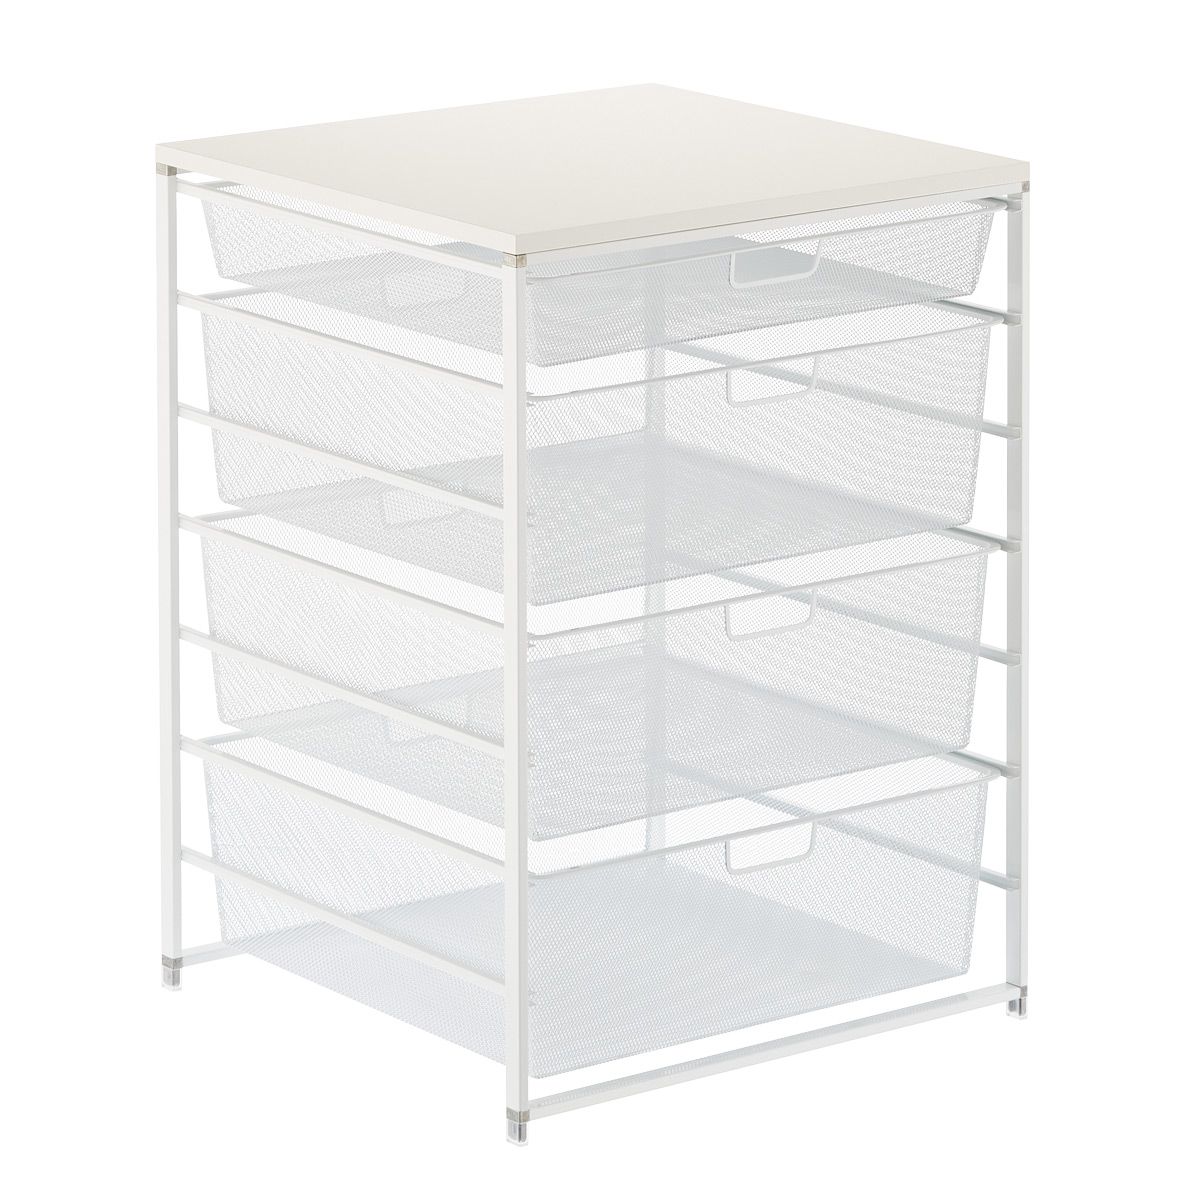 Elfa Classic Wide Mesh Drawers White | The Container Store